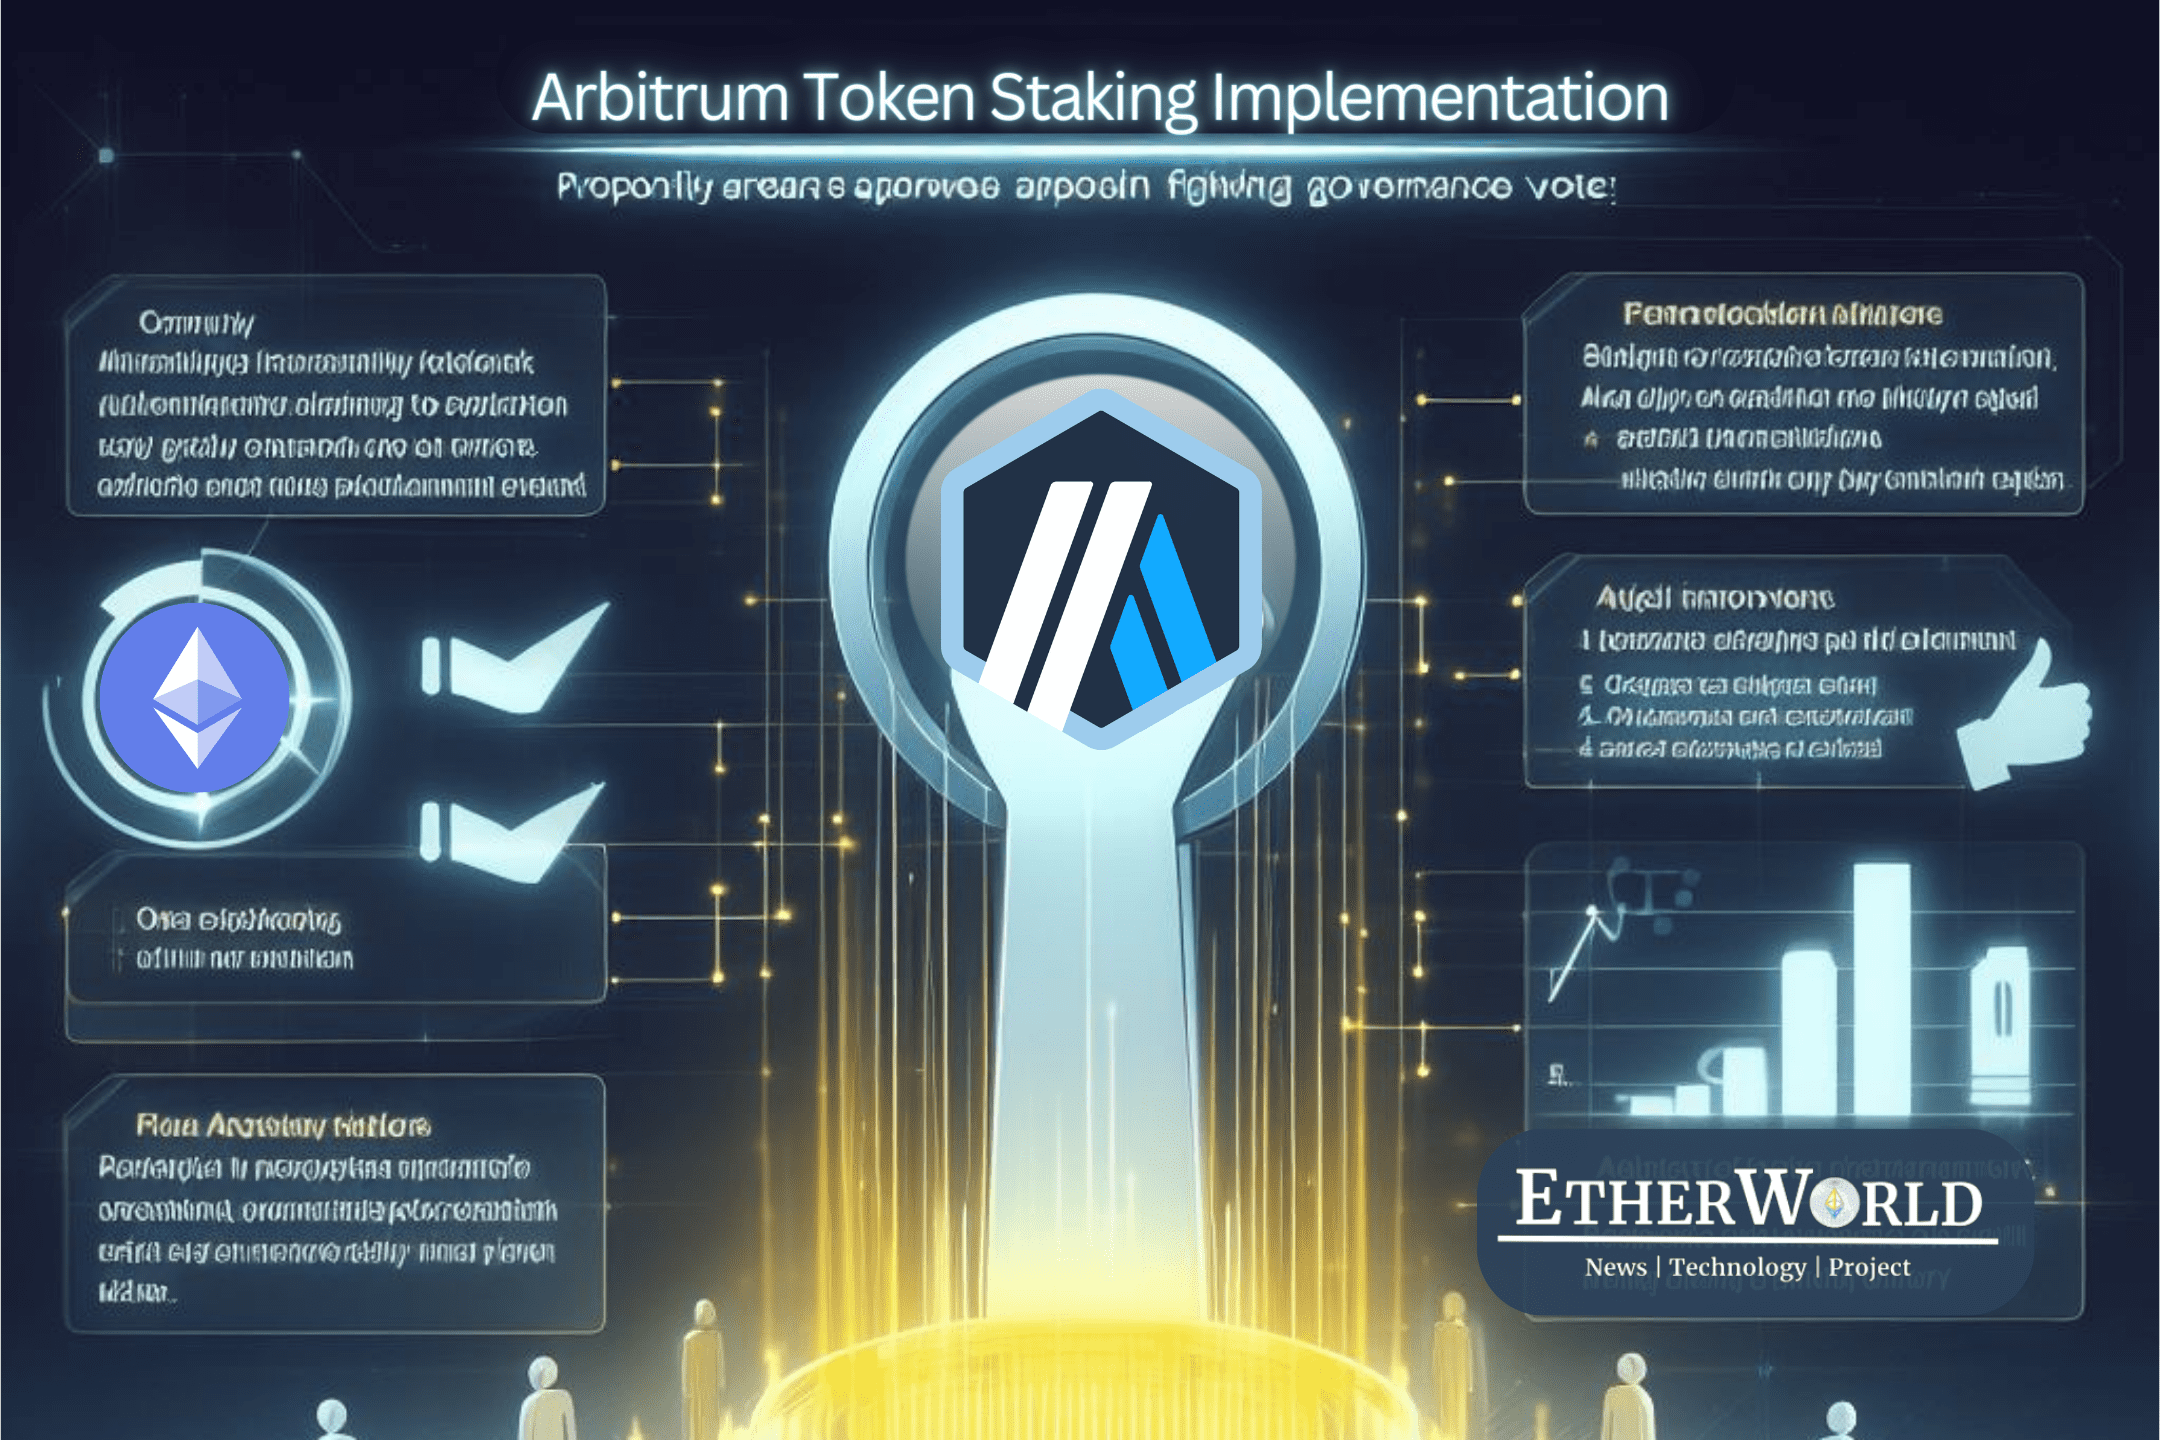 Arbitrum Community Nears Token Staking Implementation Following Successful Governance Vote